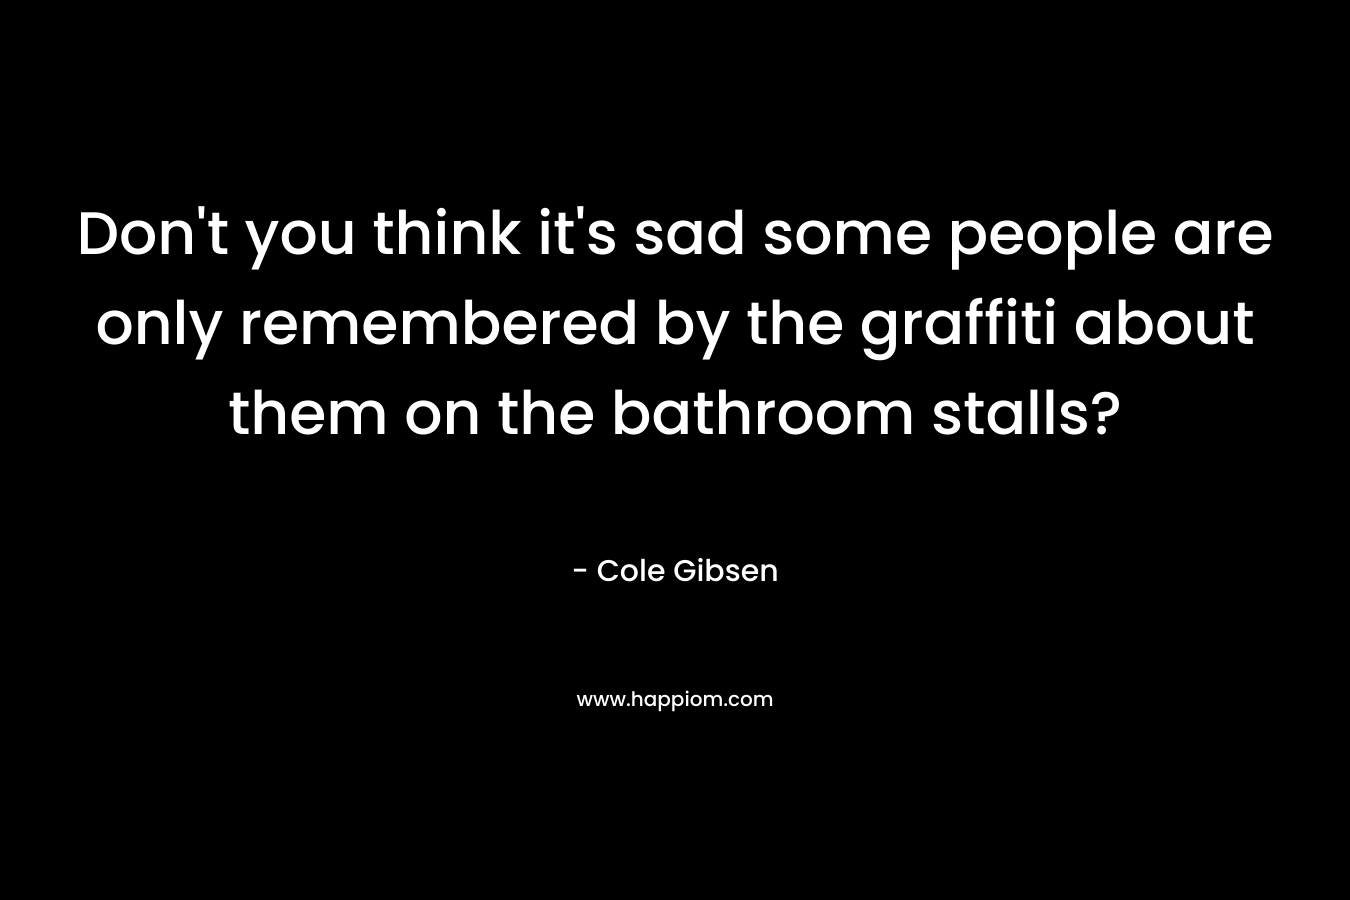 Don't you think it's sad some people are only remembered by the graffiti about them on the bathroom stalls?